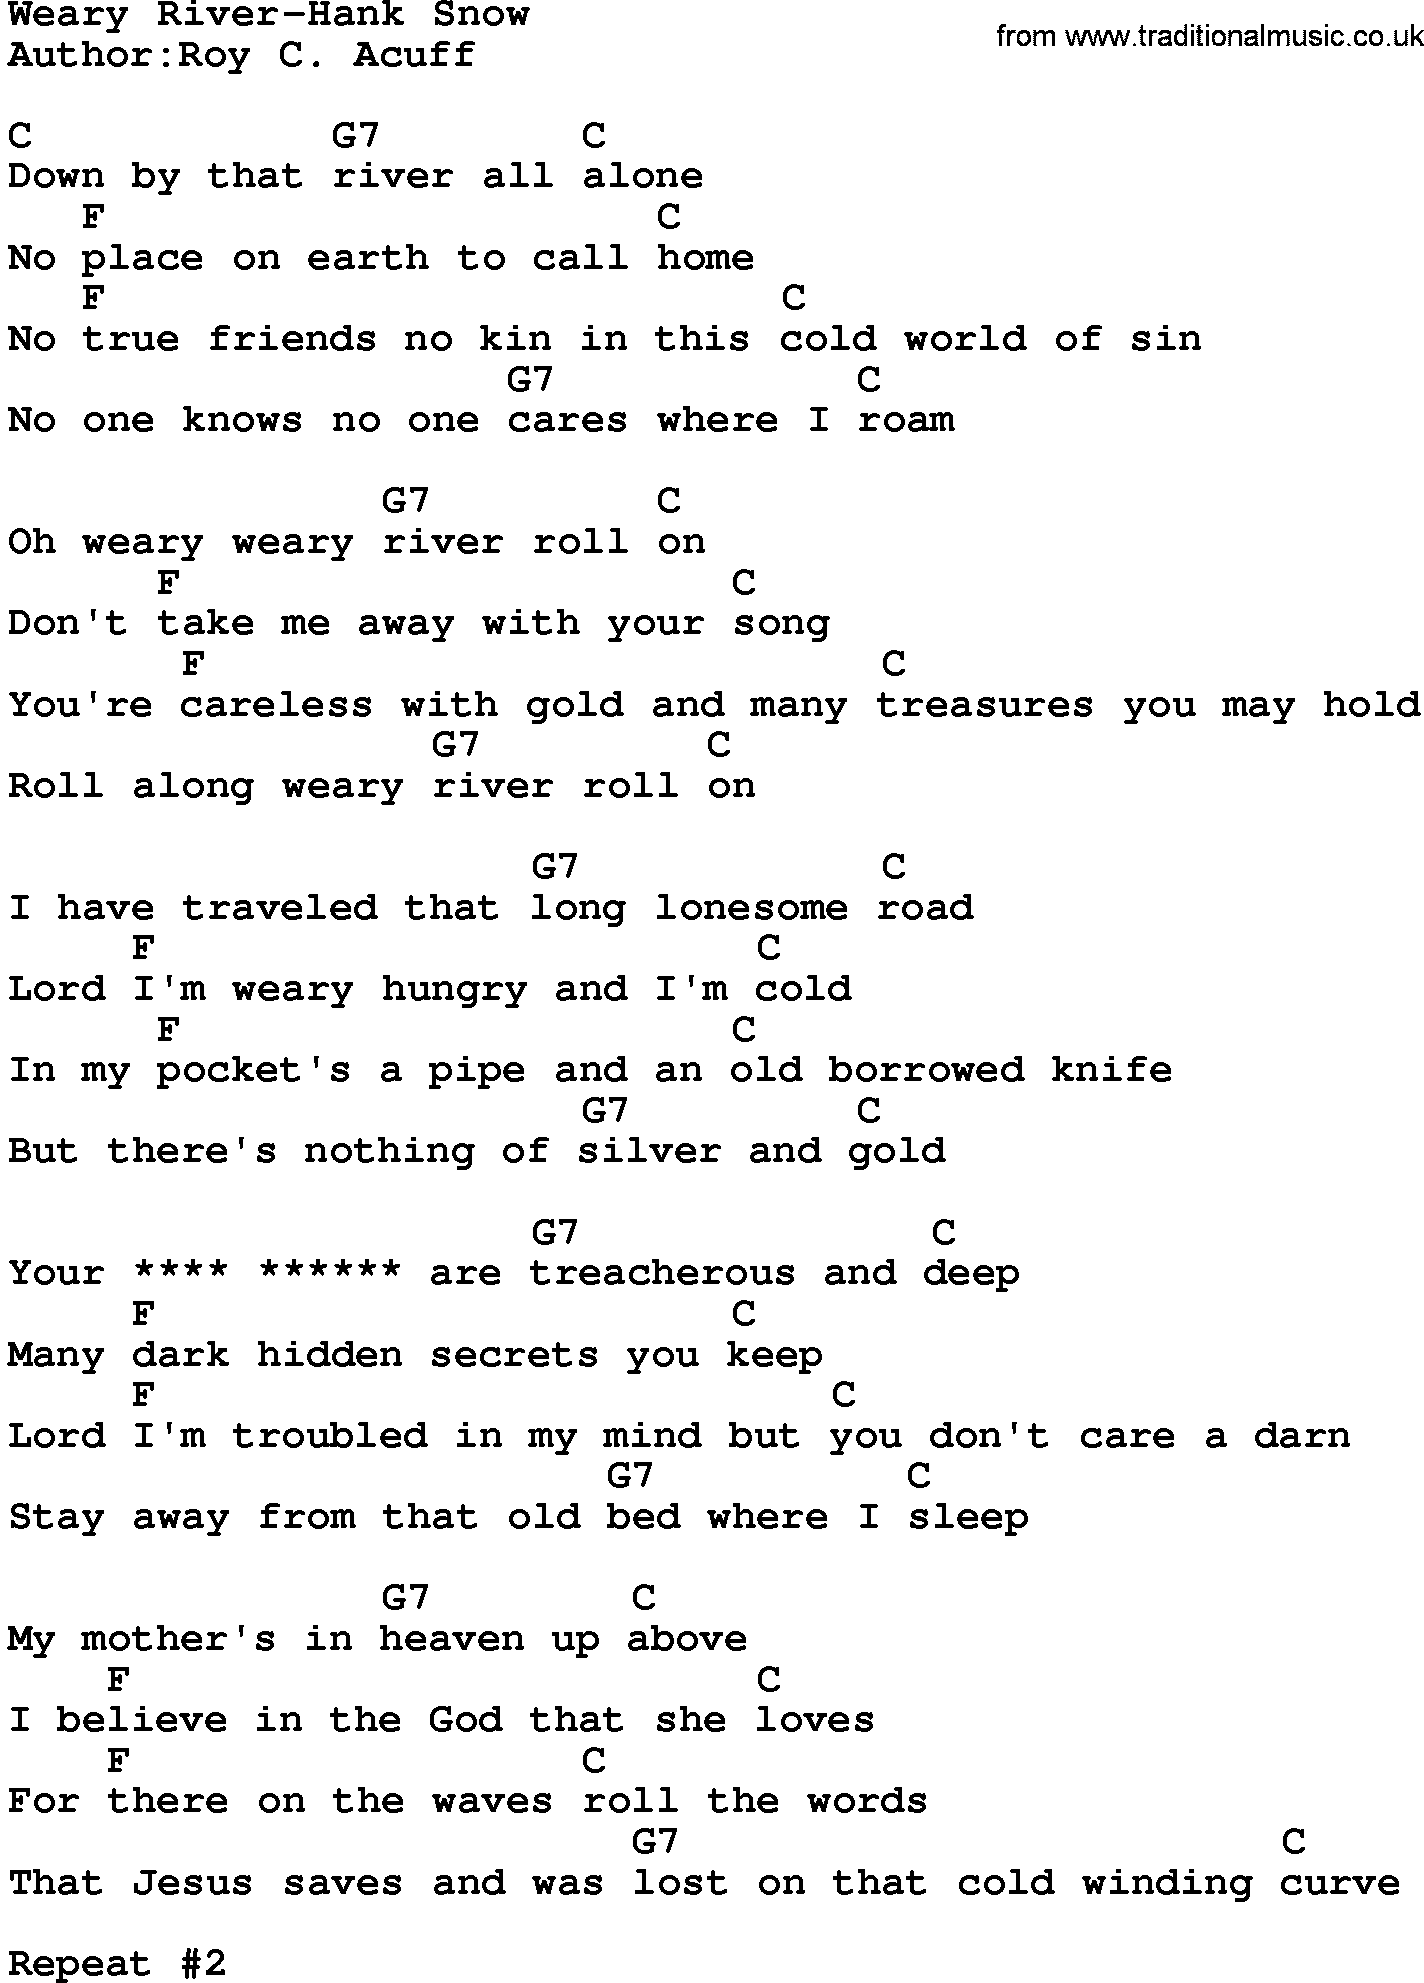 Country music song: Weary River-Hank Snow lyrics and chords